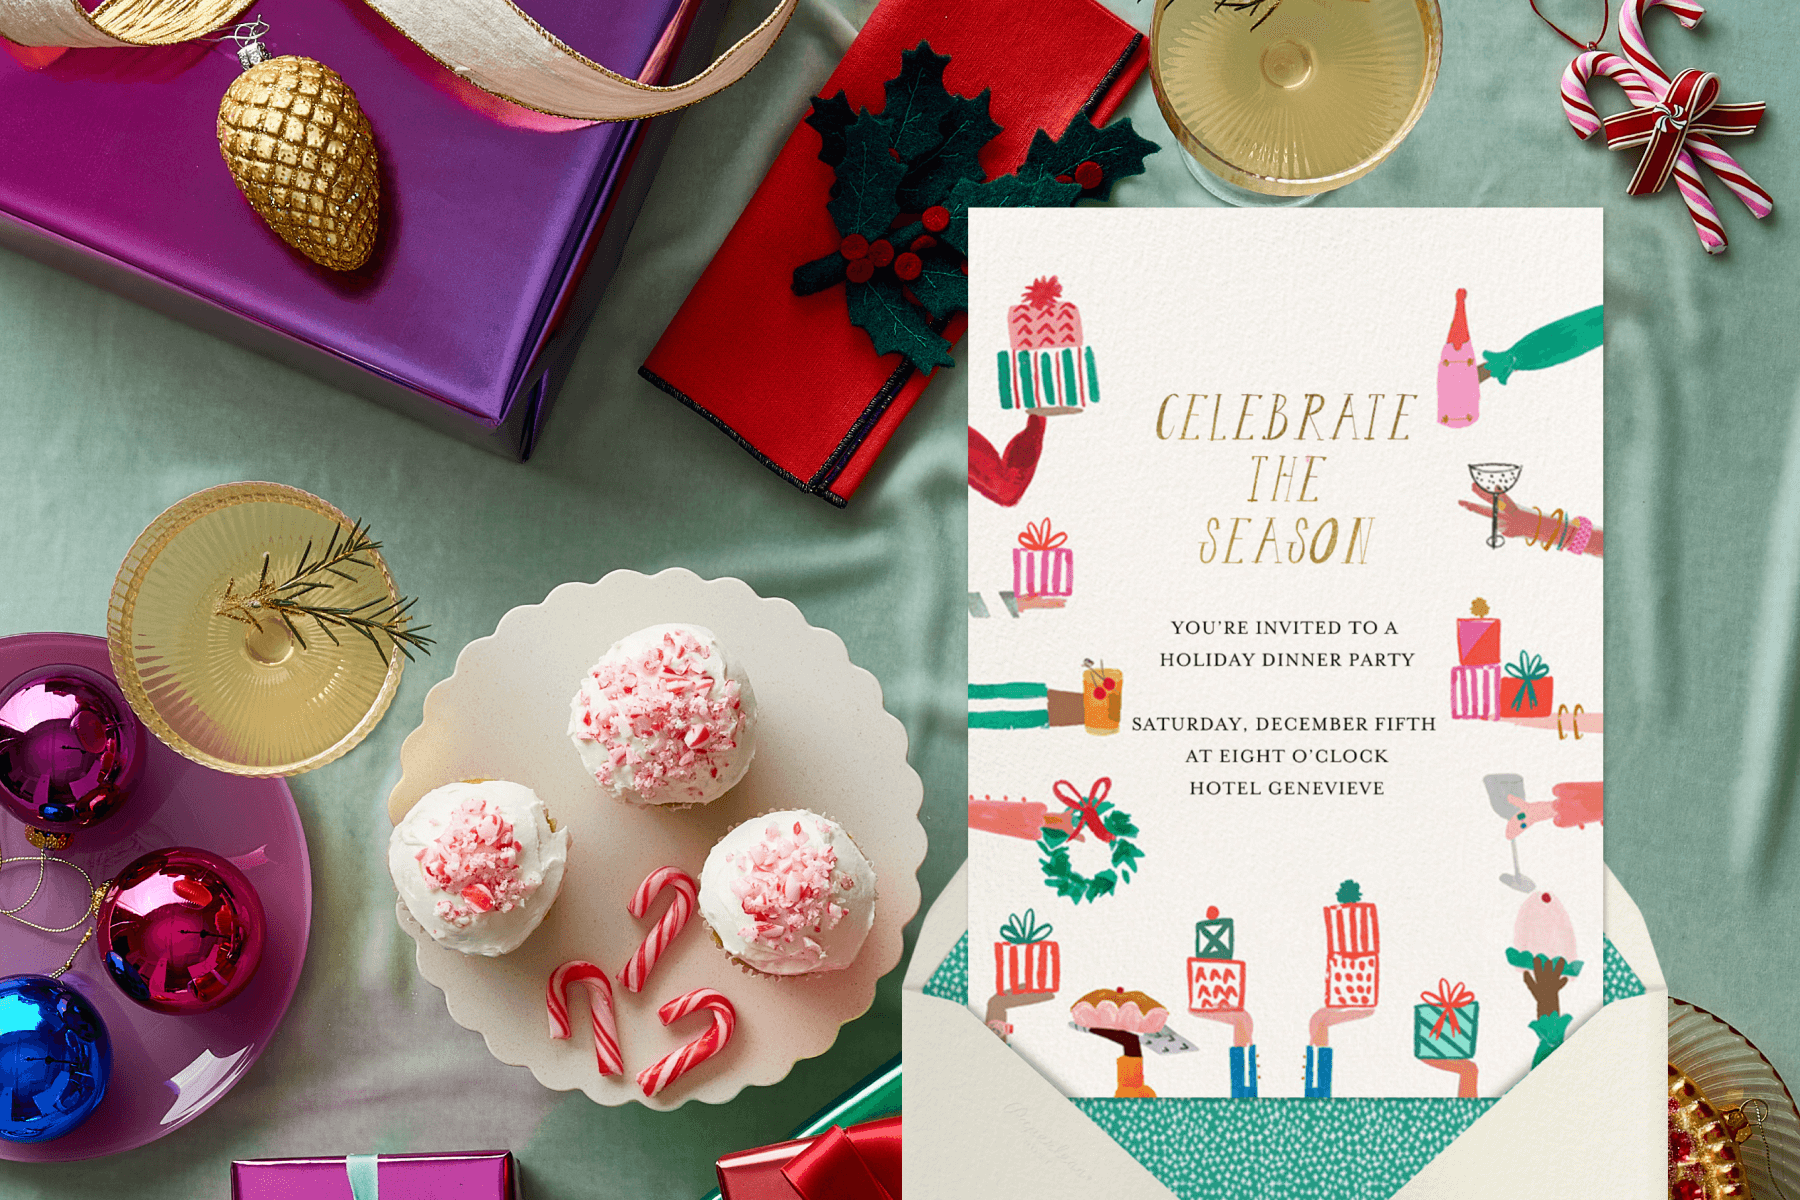 A white holiday invitation featuring a whimsical illustration of hands holding gifts, drinks, and desserts. The background includes several decor items in bright colors including ornaments, cupcakes with crushed candy canes, presents, and two glasses of Champagne.